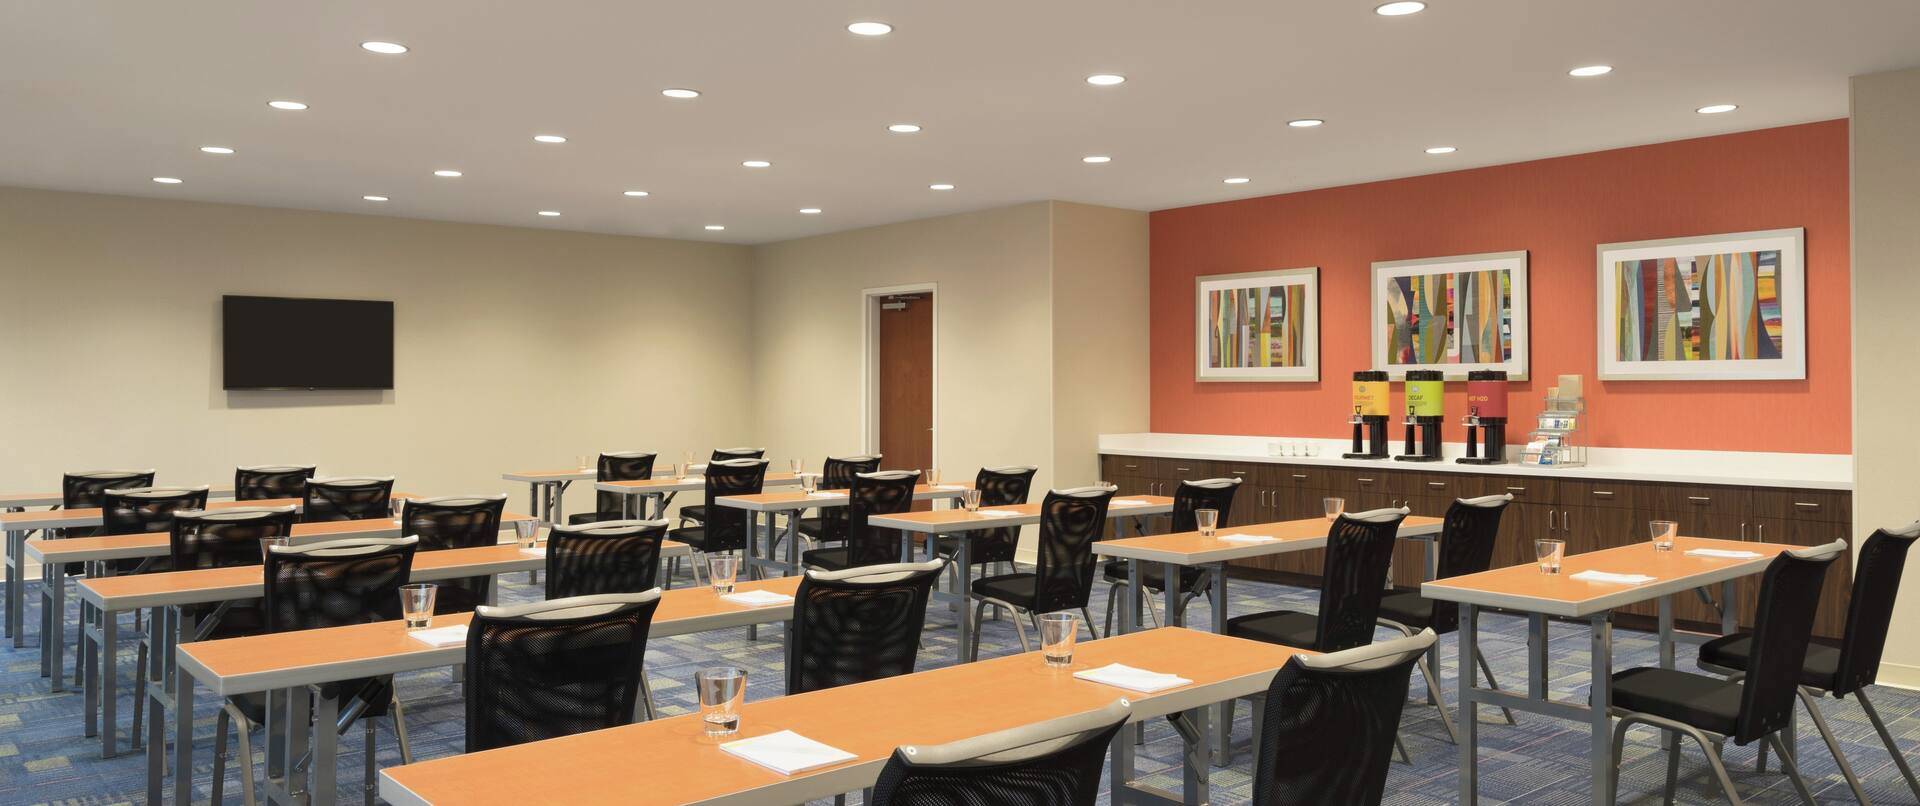 First City Meeting & Banquet Rooms